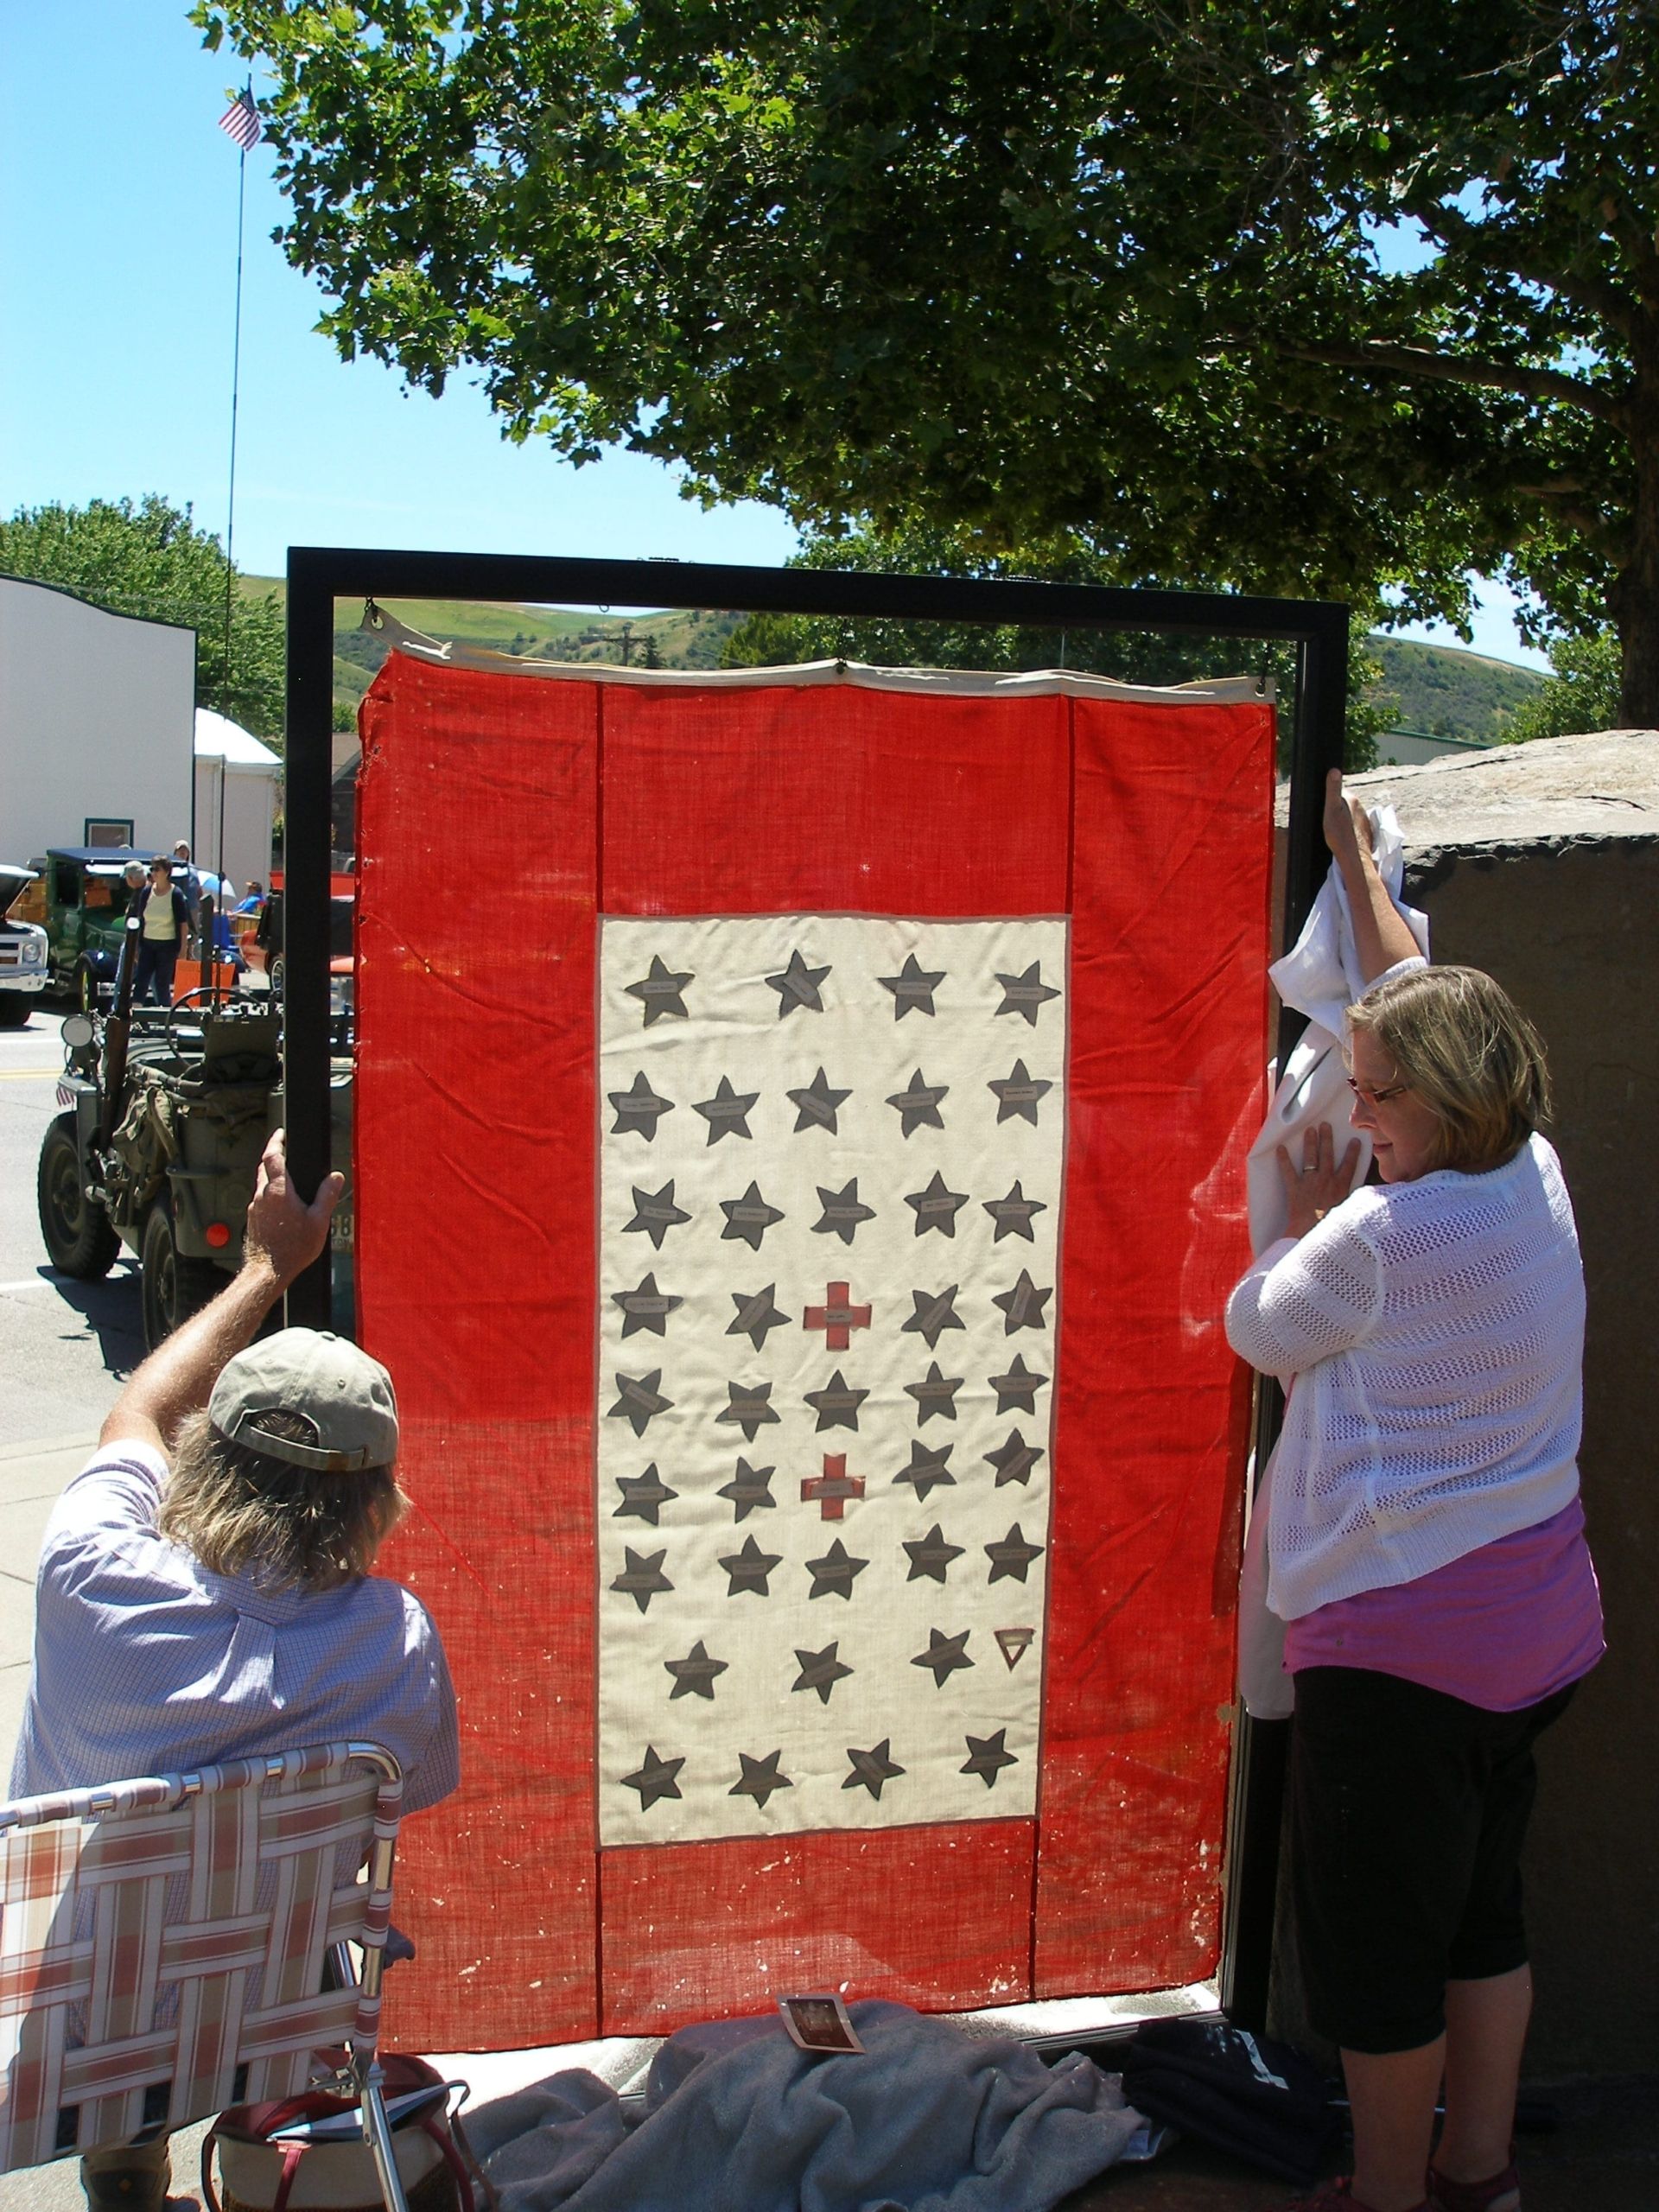 During the two hours that the service banner was on outdoor display, during Dayton's All Wheels weekend, two volunteers supported it from both sides. Once the stand has been completed by a local artisan, this will no longer be necessary!